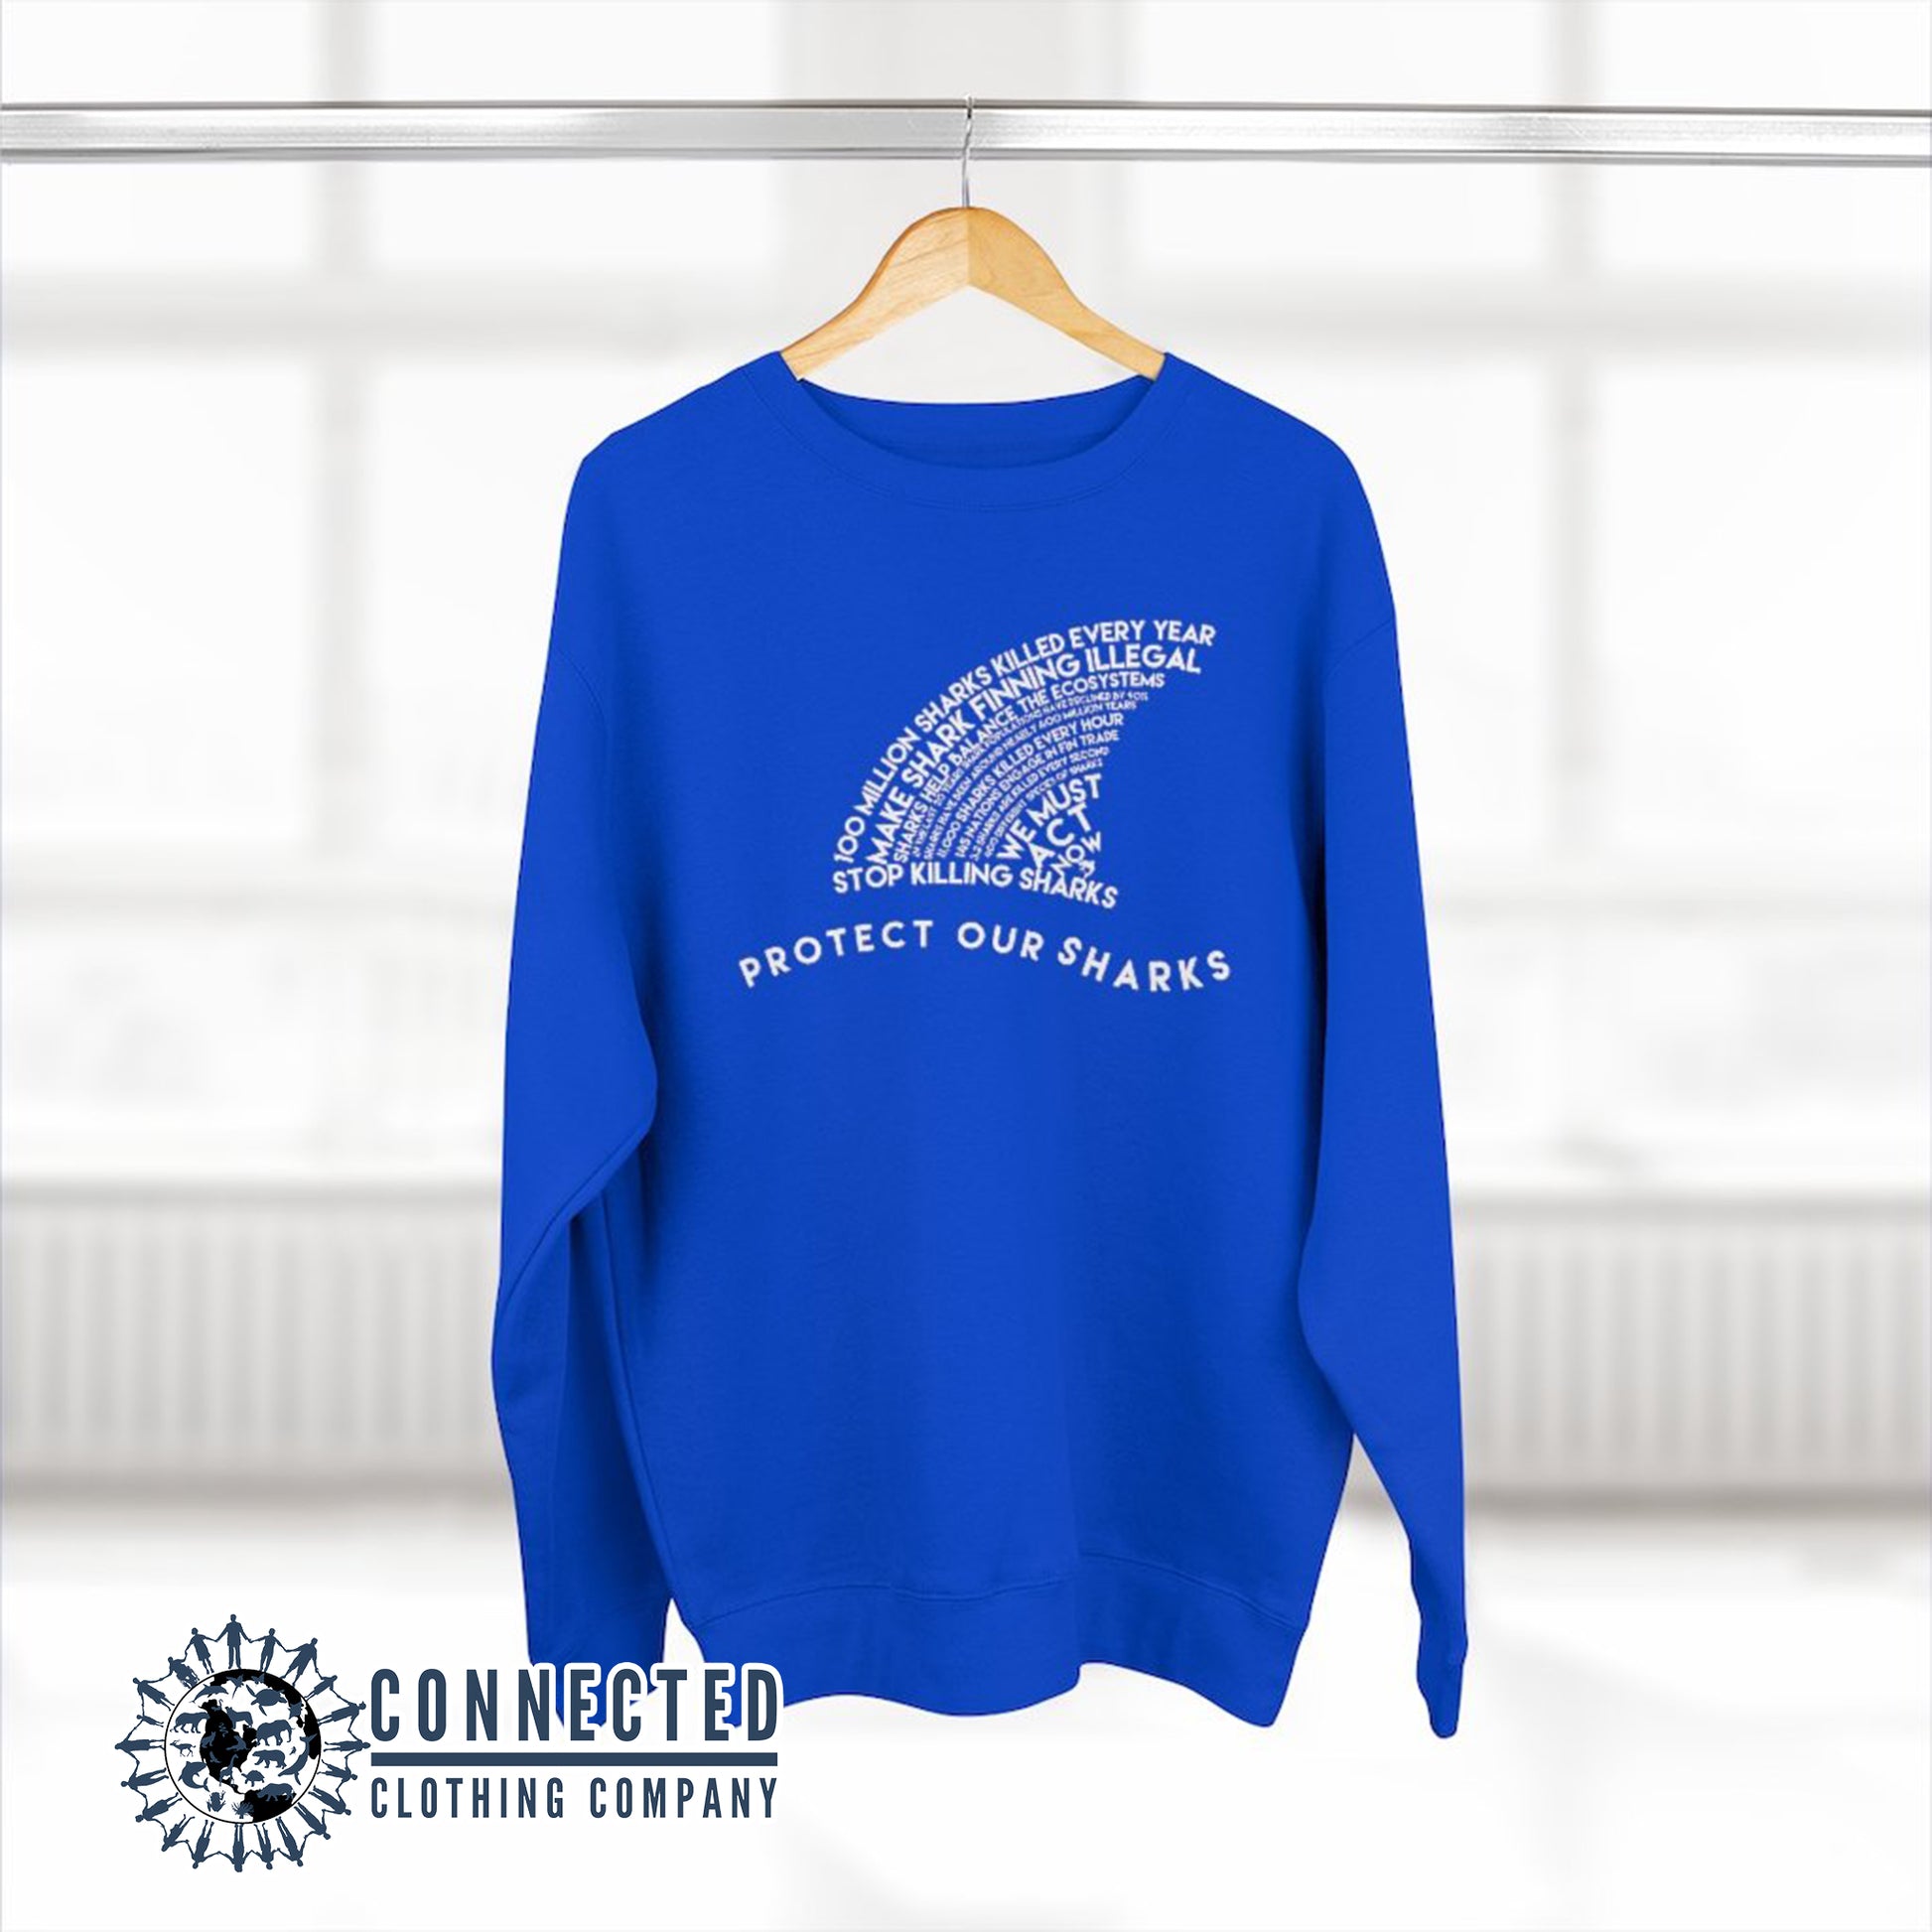 Royal Blue Protect Our Sharks Unisex Crewneck Sweatshirt - Connected Clothing Company - Ethically and Sustainably Made - 10% of profits donated to shark conservation and ocean conservation